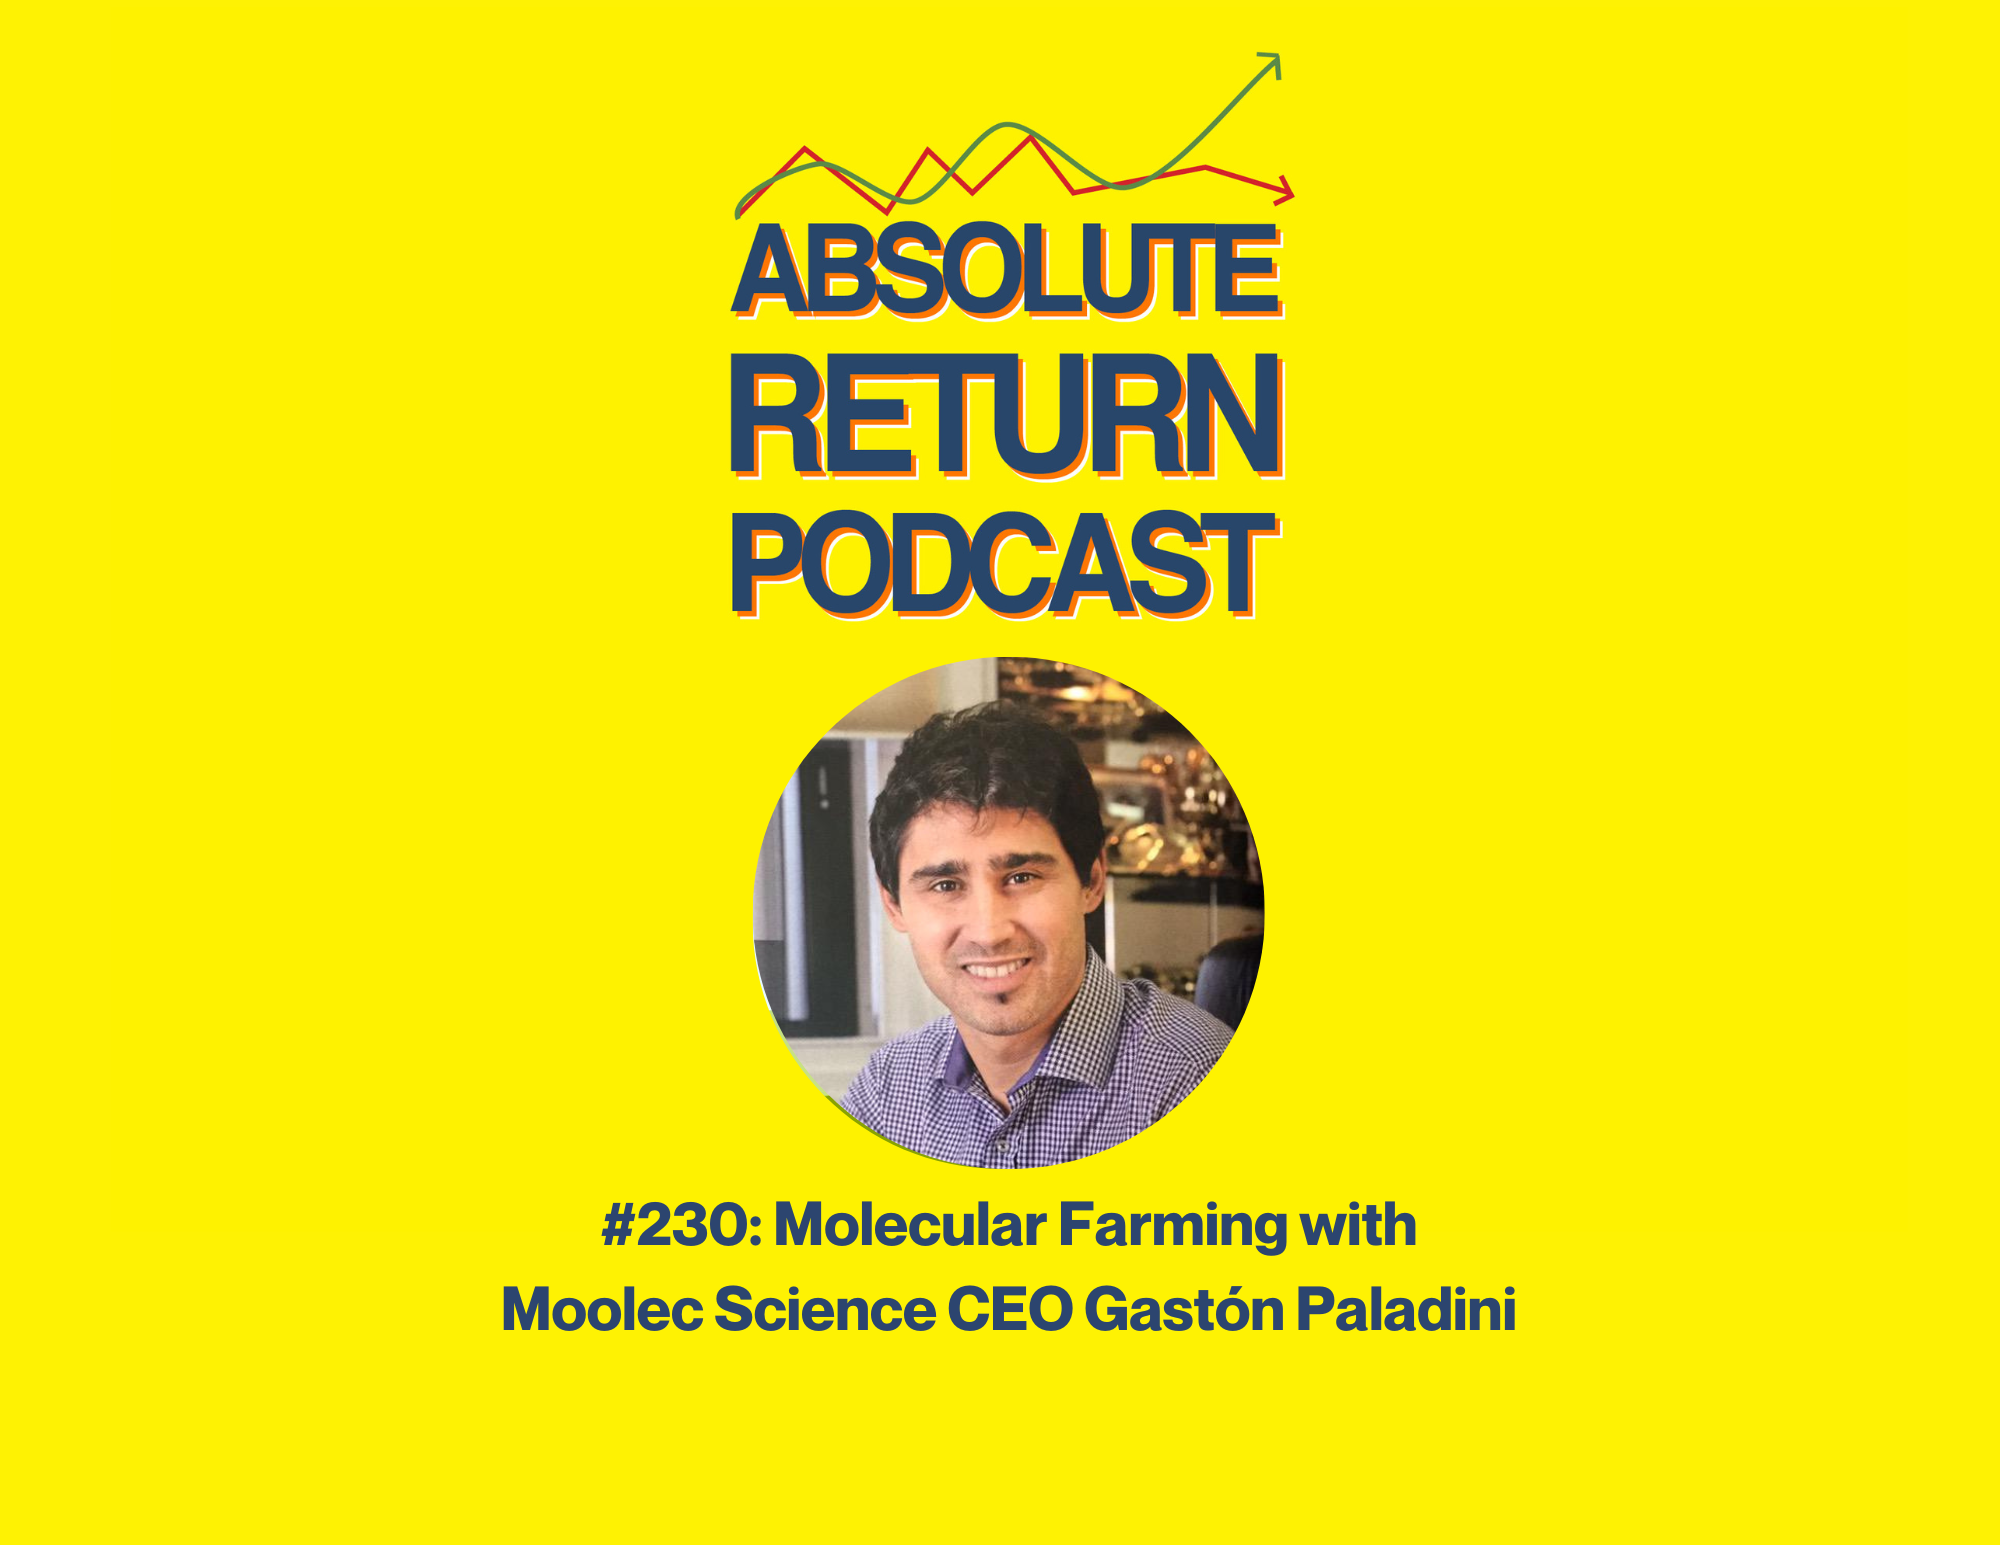 Absolute Return Podcast #230: Molecular Farming with Moolec Science CEO Gastón Paladini